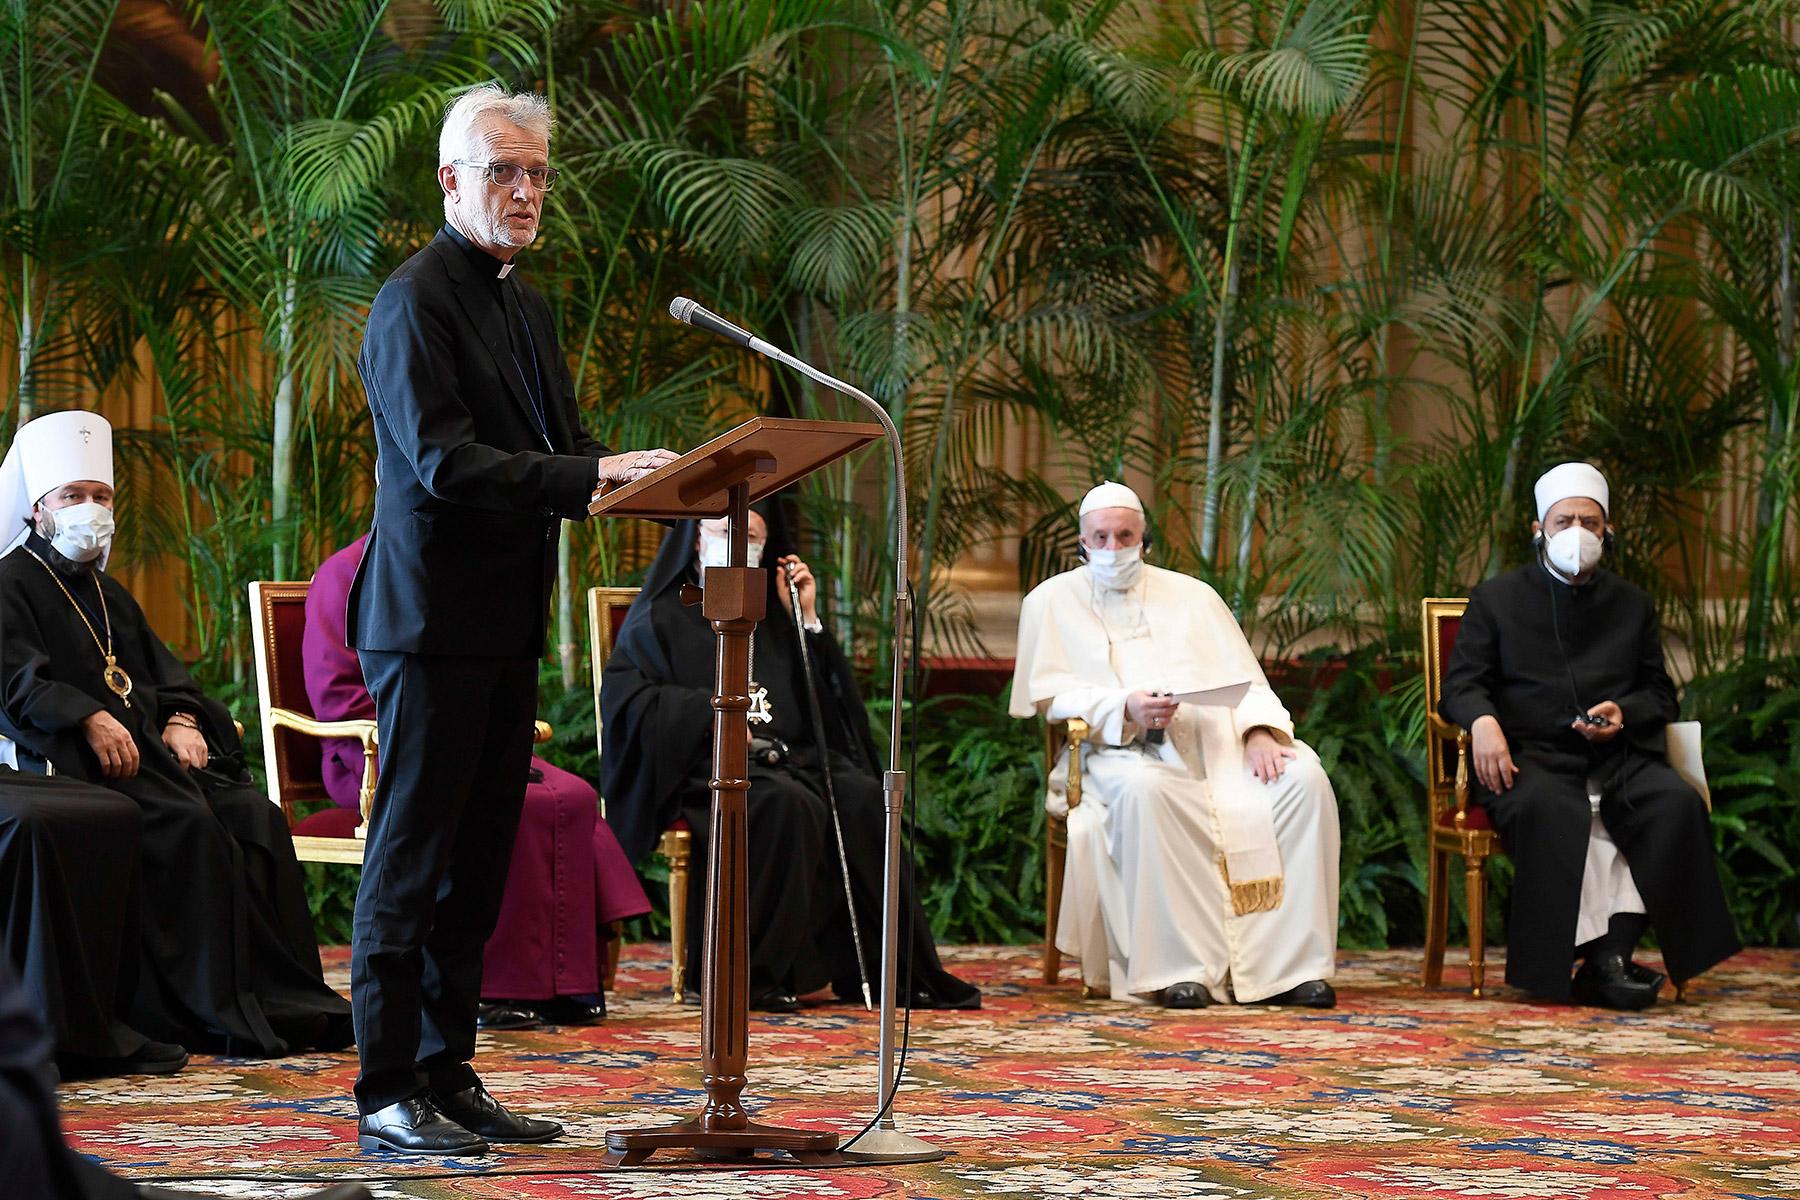 LWF General Secretary Rev. Dr Martin Junge addresses faith leaders gathered in the Vatican for the âFaith and Science: Towards COP26â meeting. Photo: Vatican Media